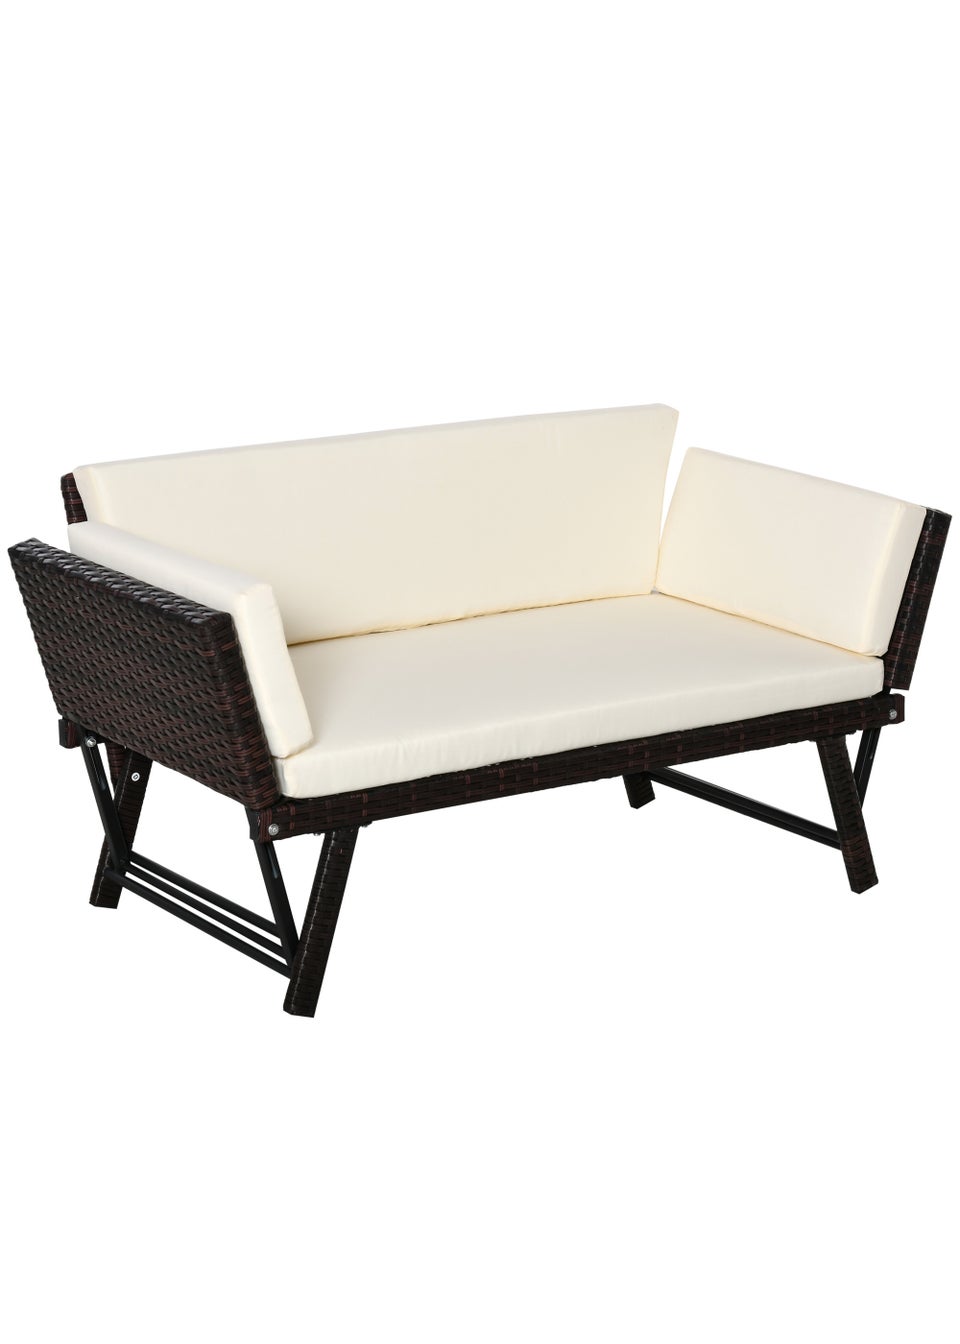 Outsunny 2 in 1 Rattan Folding Chaise Lounger